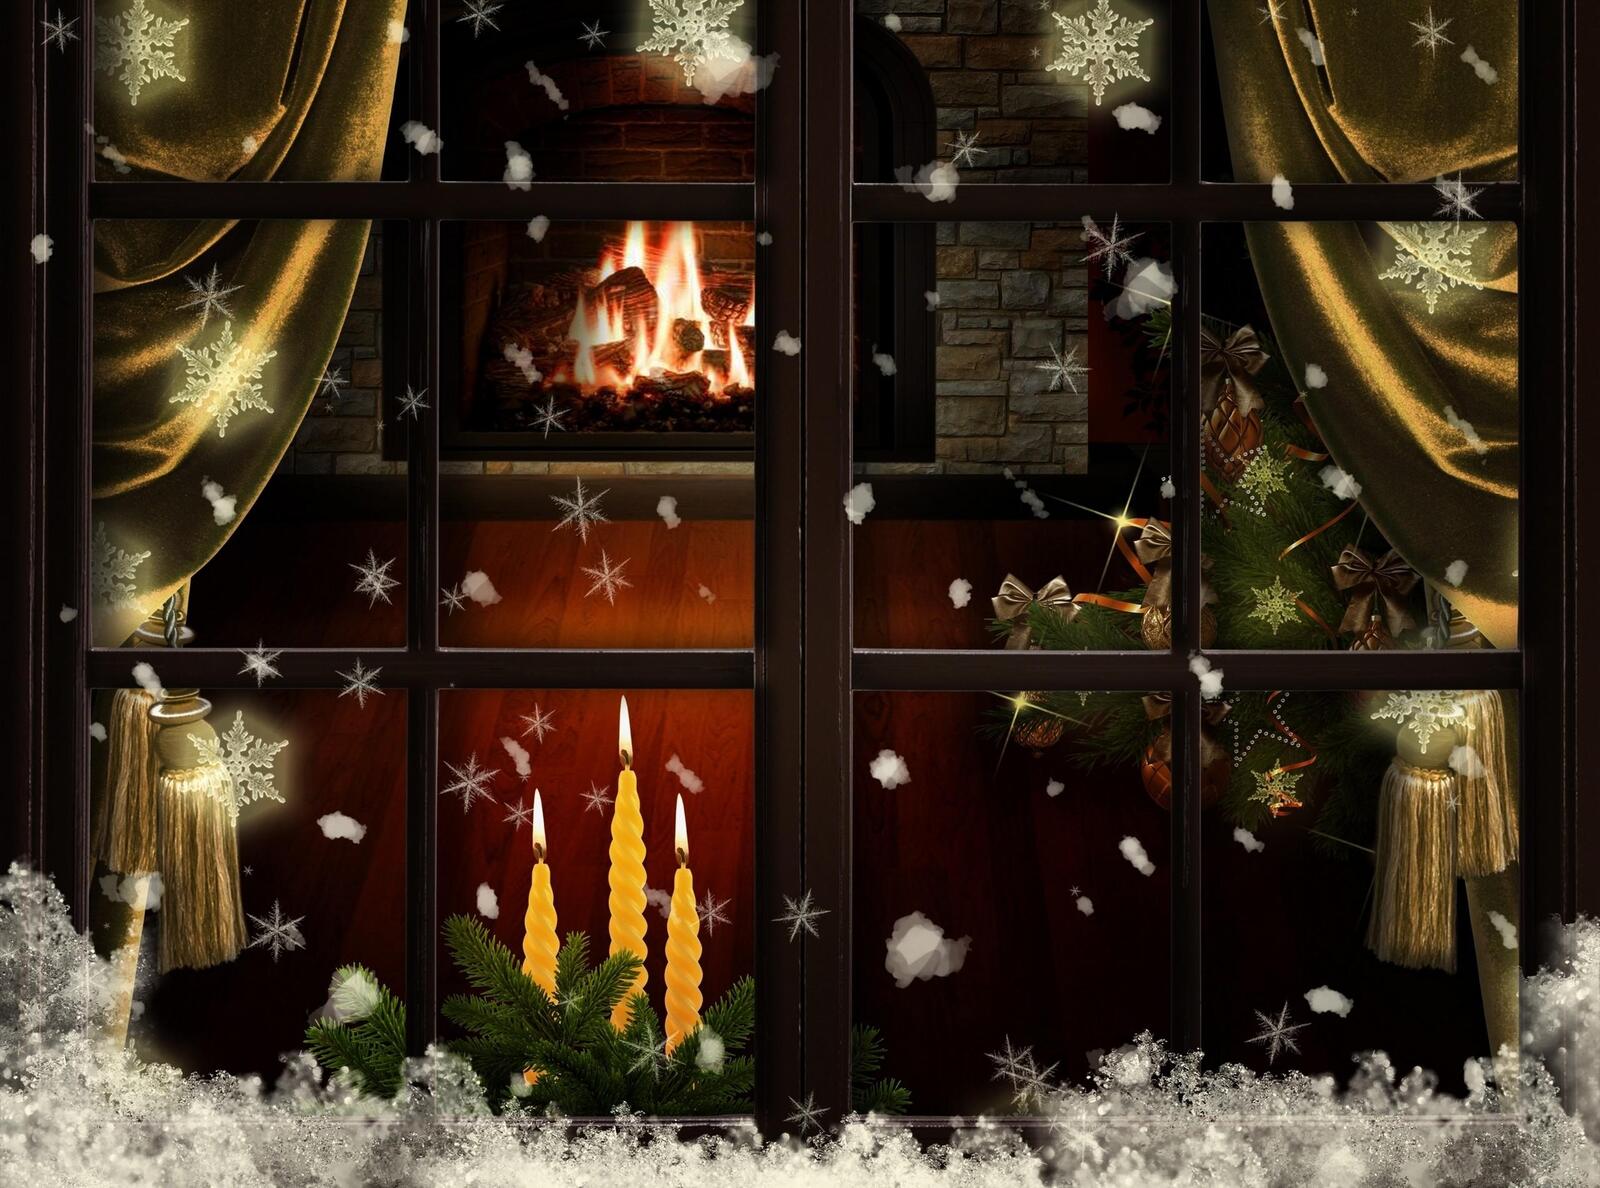 Wallpapers window candles snow on the desktop